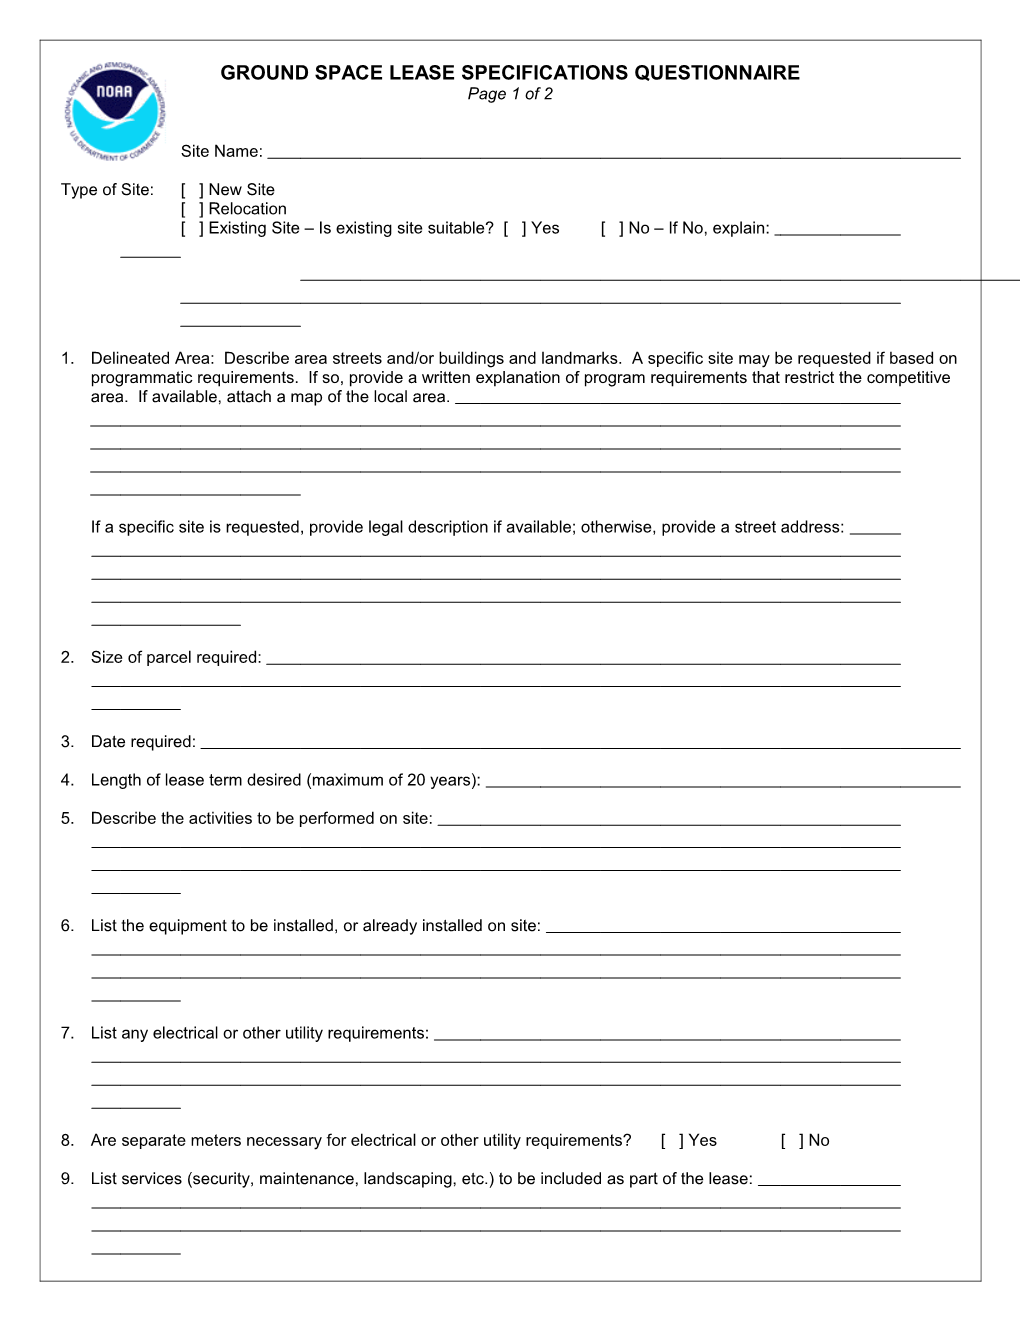 Ground Space Lease Specifications Questionnaire